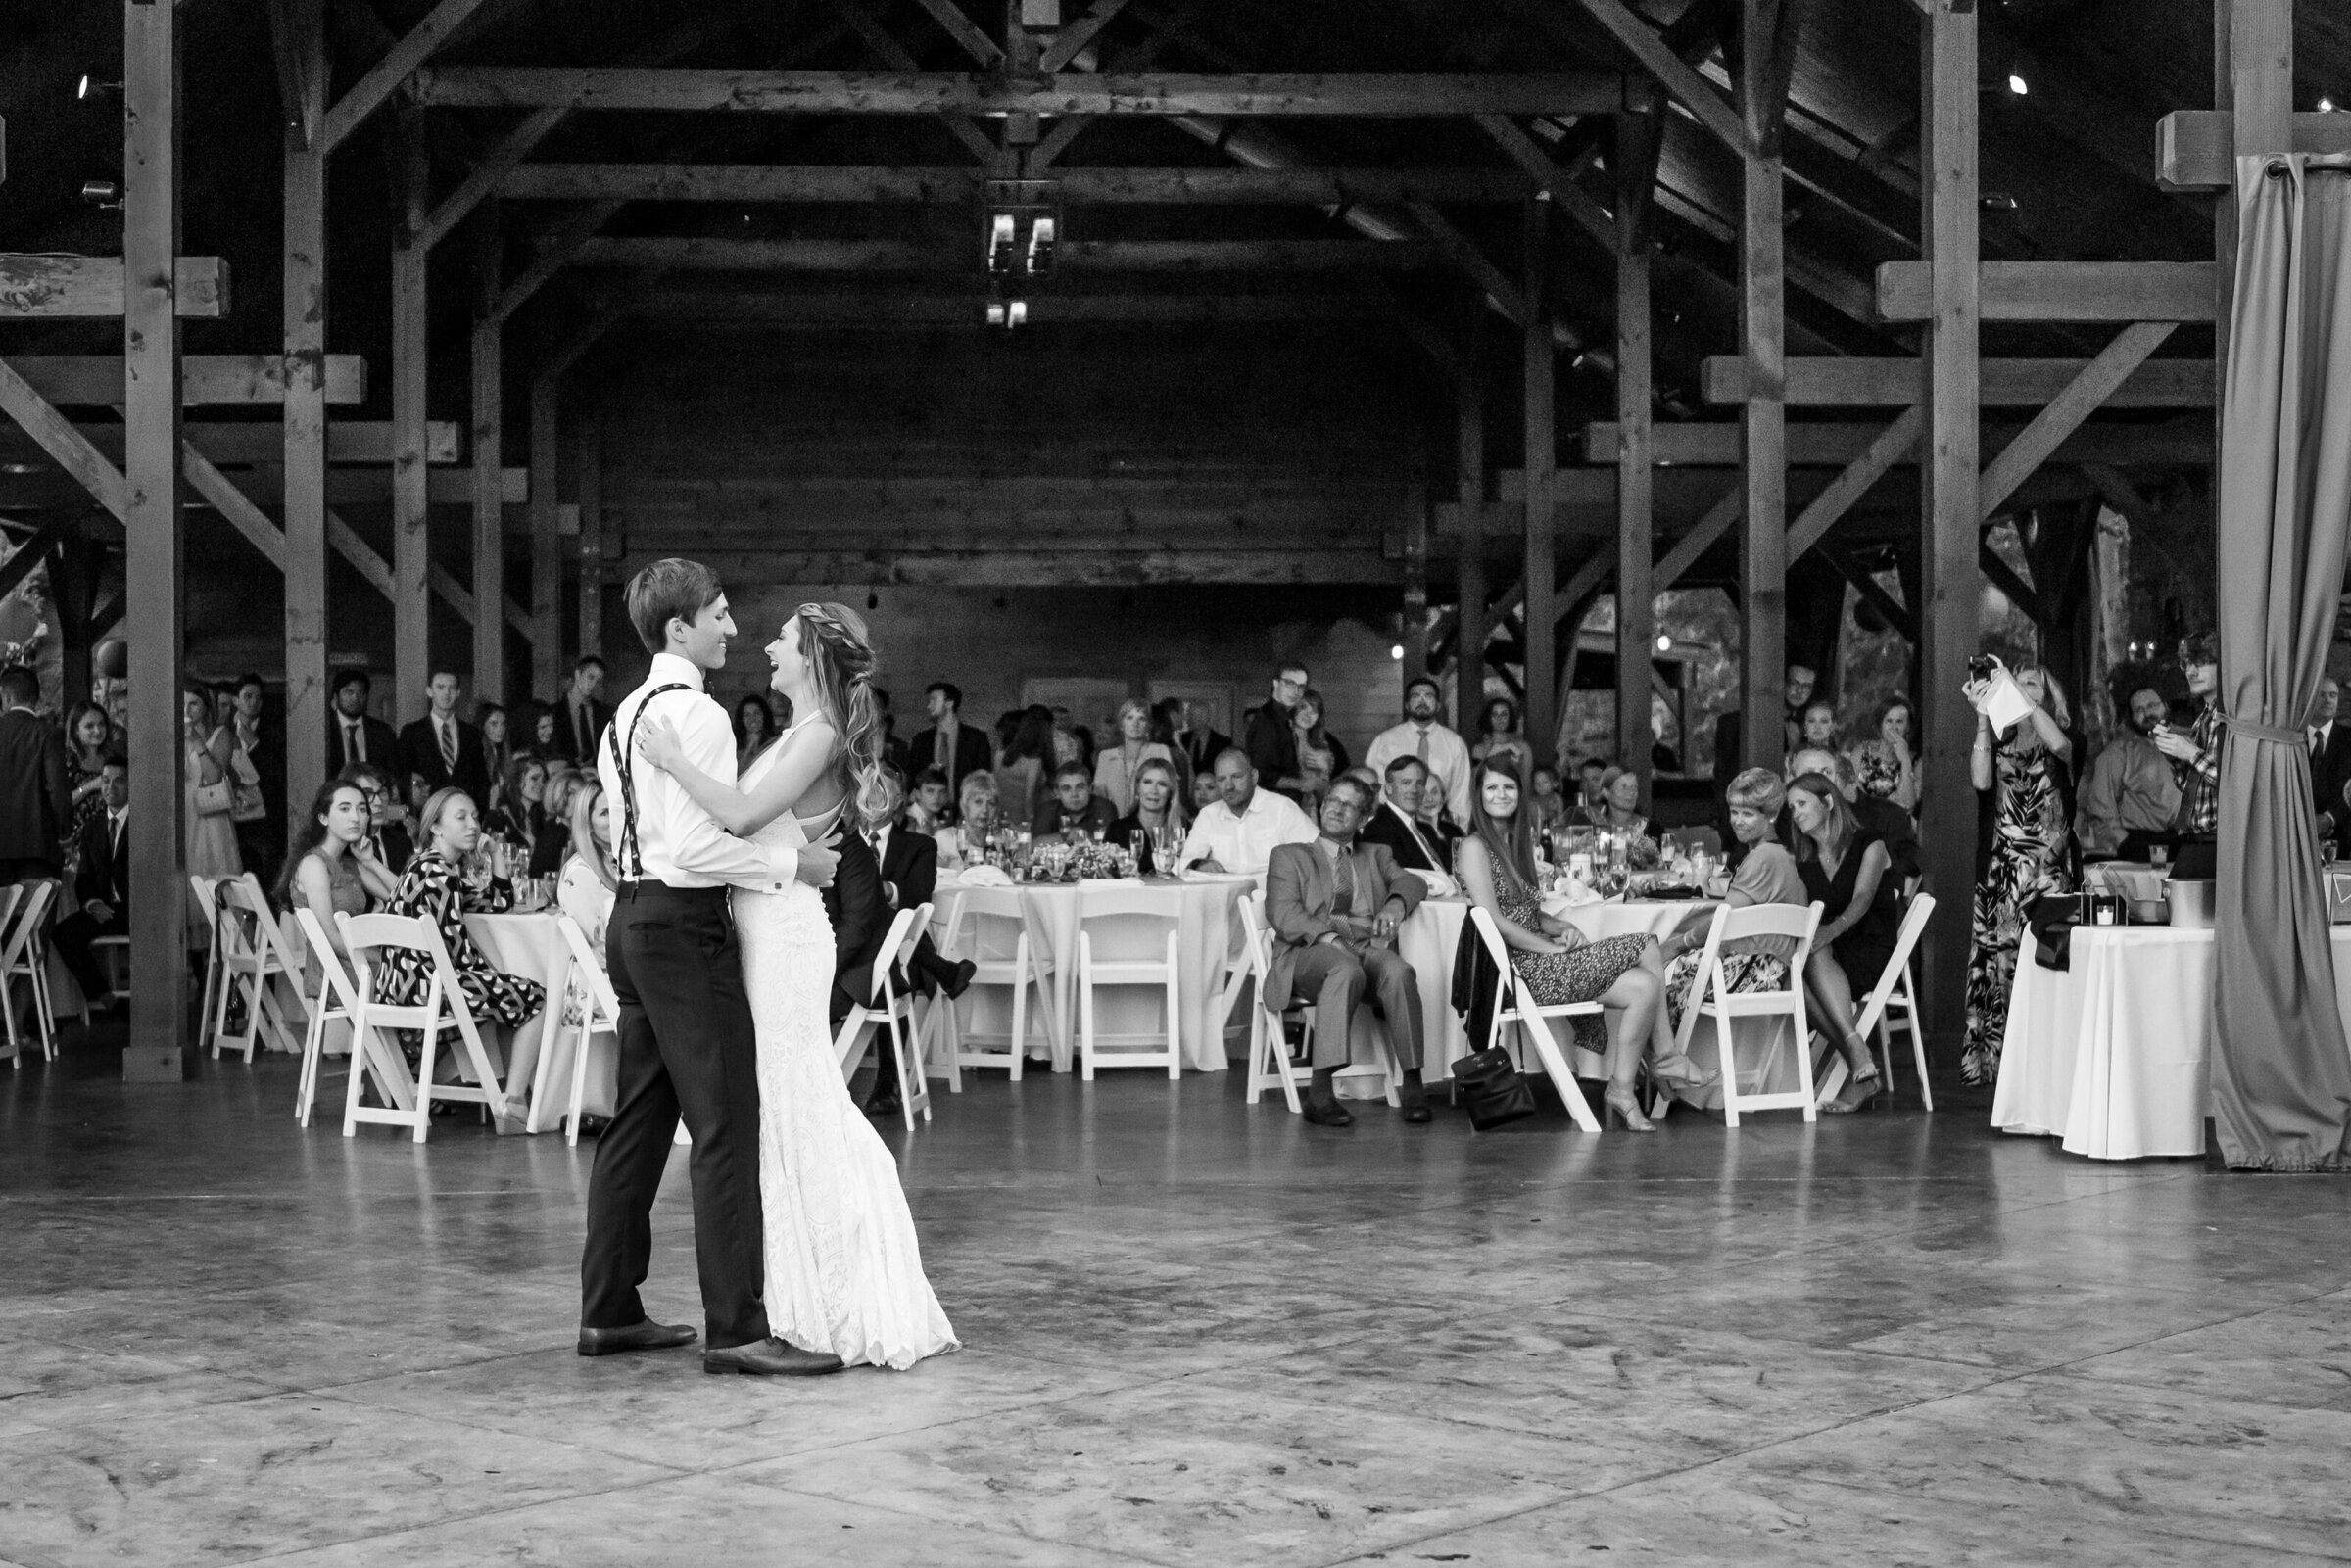 Ohio groom shares first dance with his bride on their wedding day, surrounding by all their friends and family. Photo taken by Aaron Aldhizer